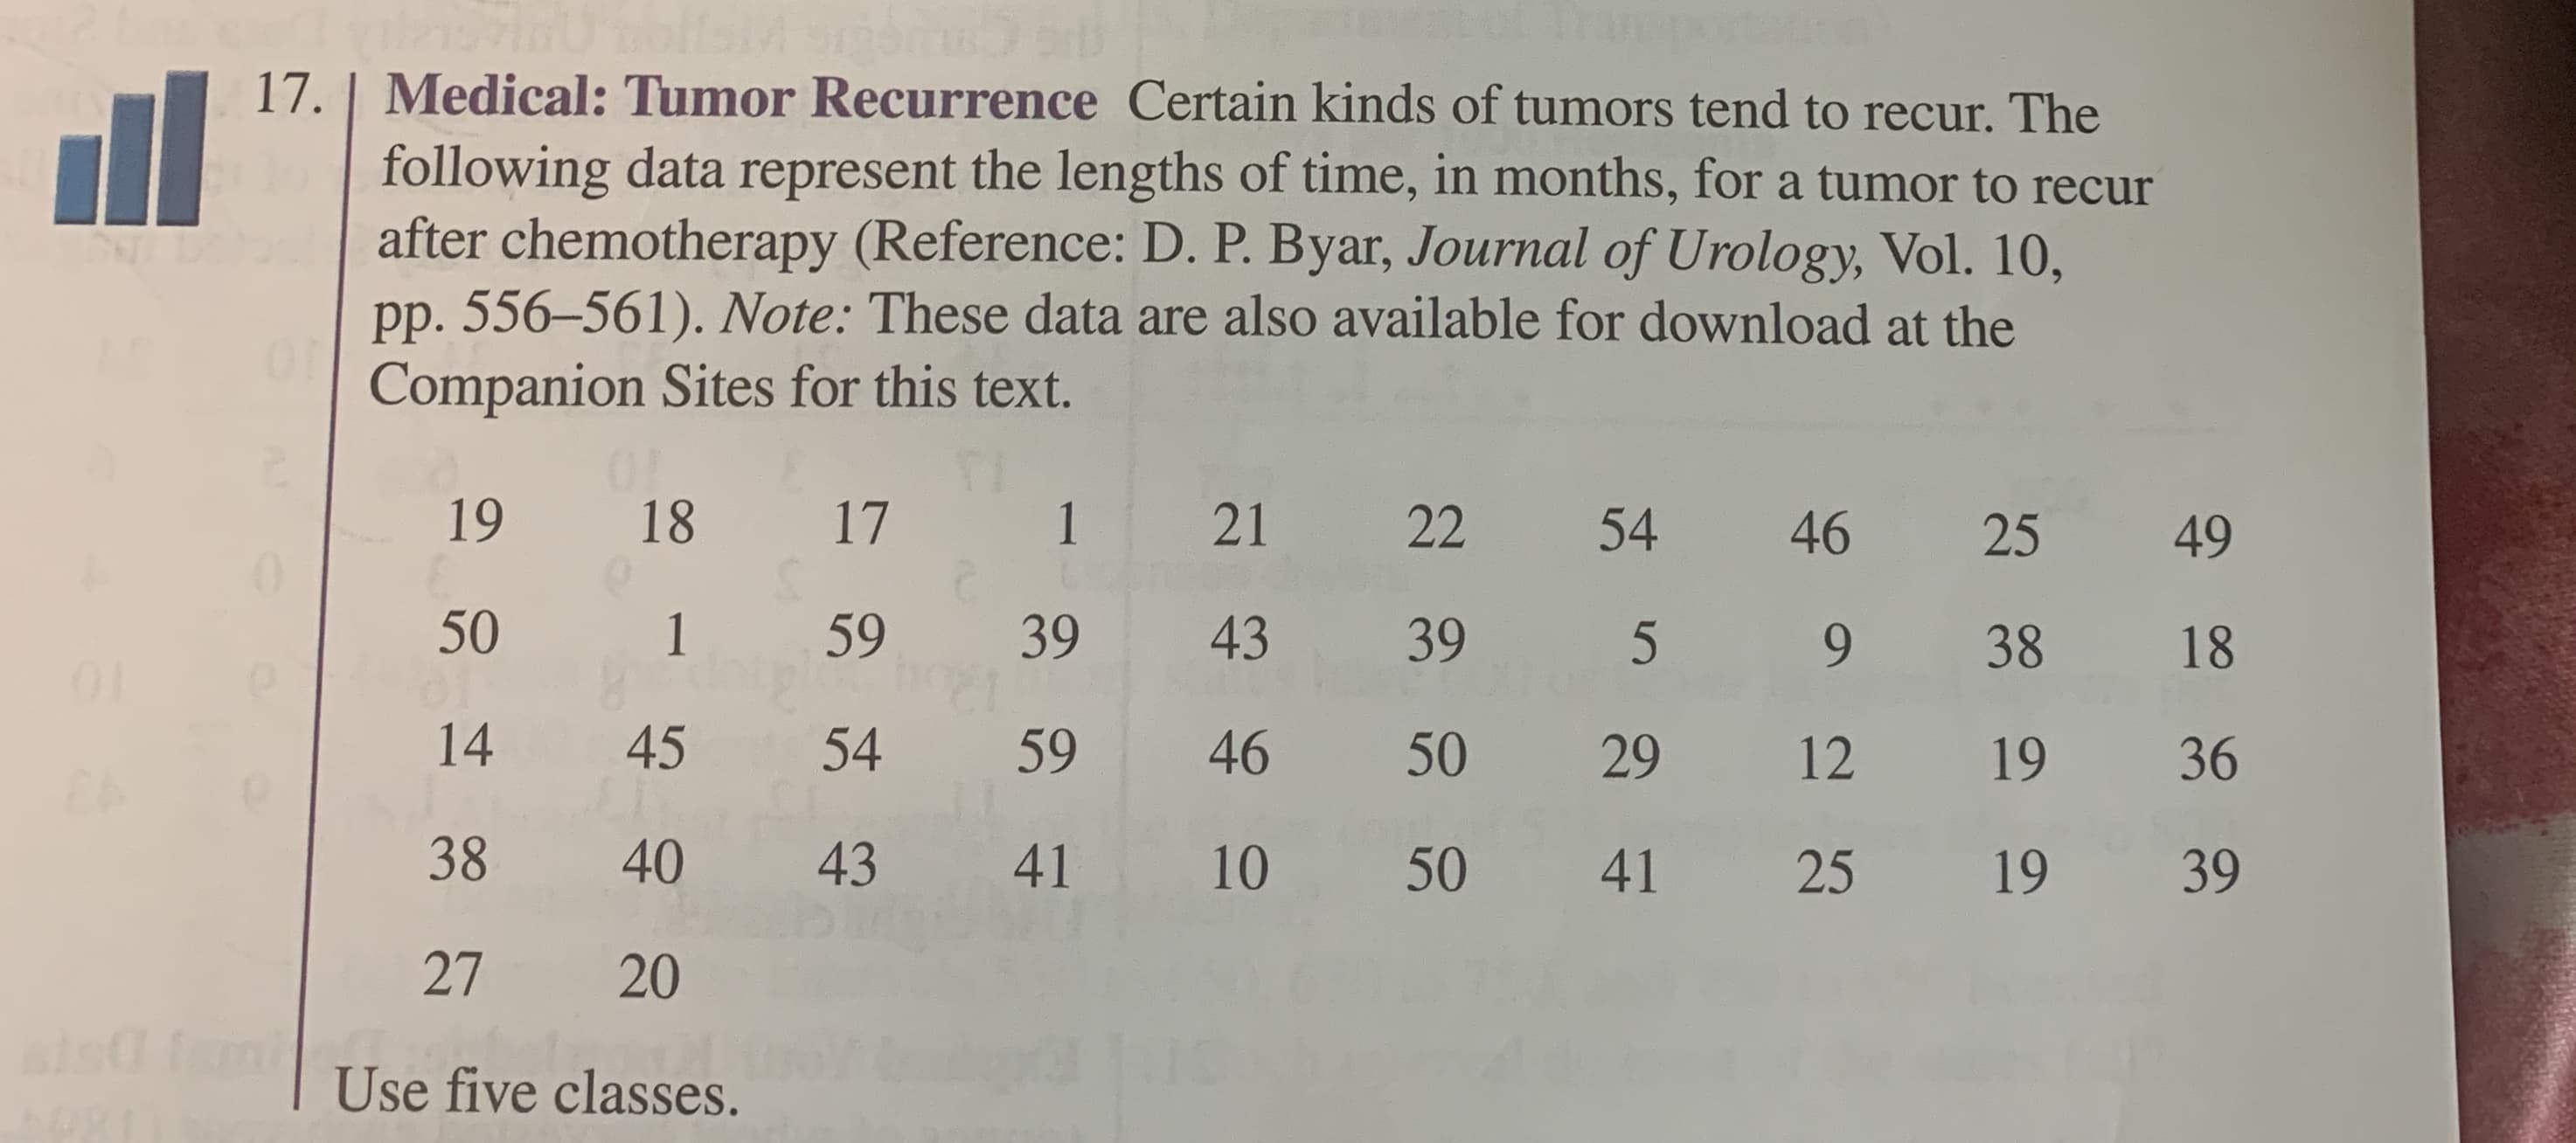 laisthaU tollM
17. | Medical: Tumor Recurrence Certain kinds of tumors tend to recur. The
following data represent the lengths of time, in months, for a tumor to recur
after chemotherapy (Reference: D. P. Byar, Journal of Urology, Vol. 10,
pp. 556-561). Note: These data are also available for download at the
Companion Sites for this text.
T7
1
17
OF
18
19
21
22
54
46
25
49
50
1
59
39
43
39
5
38
18
01
45
54
59
46
50
29
12
36
19
38
40
43
41
10
50
41
25
39
27
20
ats Tse five classes.
081
